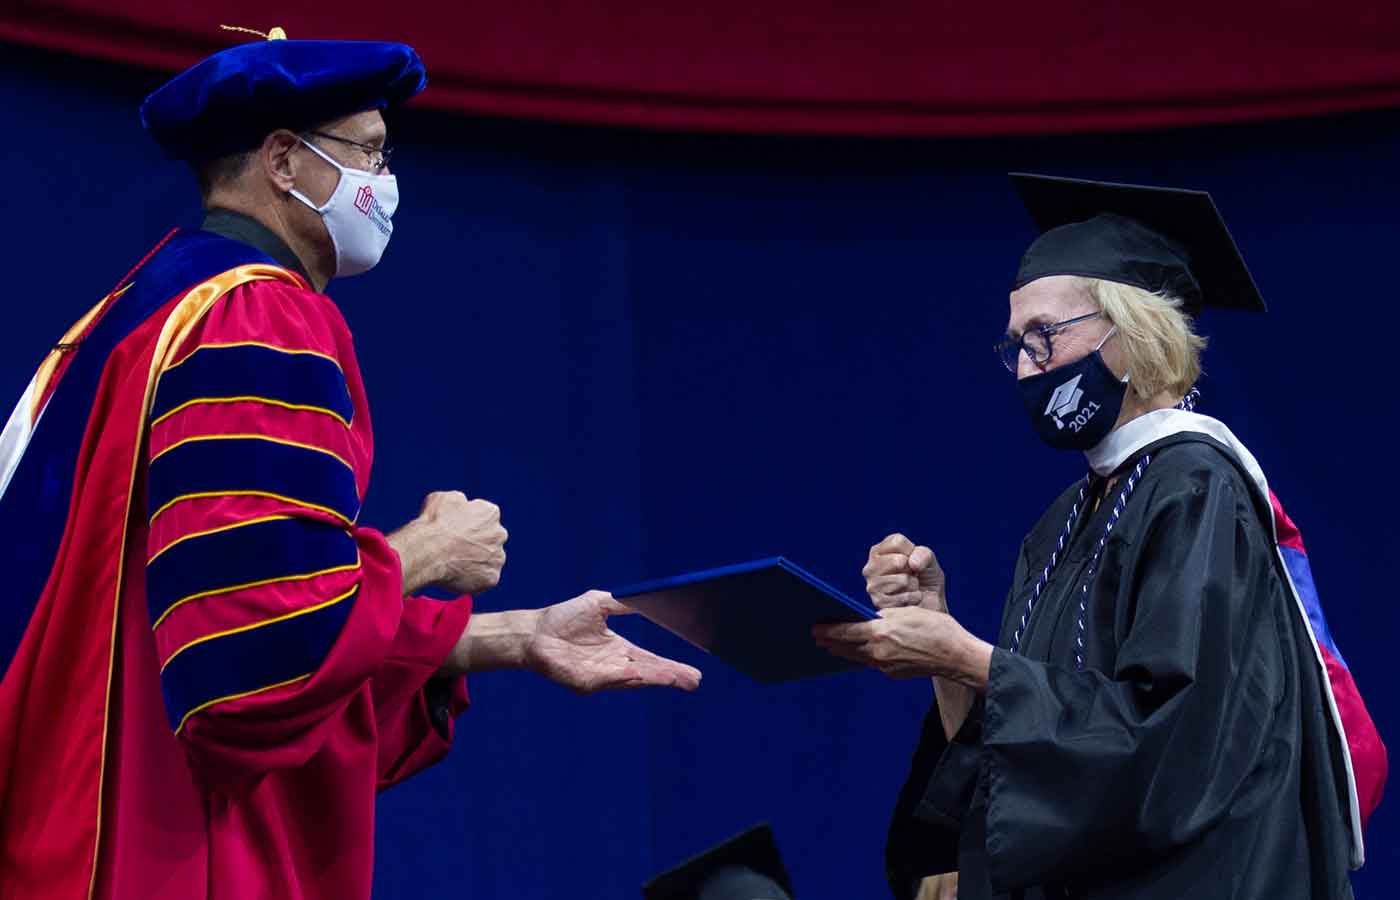 Maryann Wickemeyer graduates at the age of 71